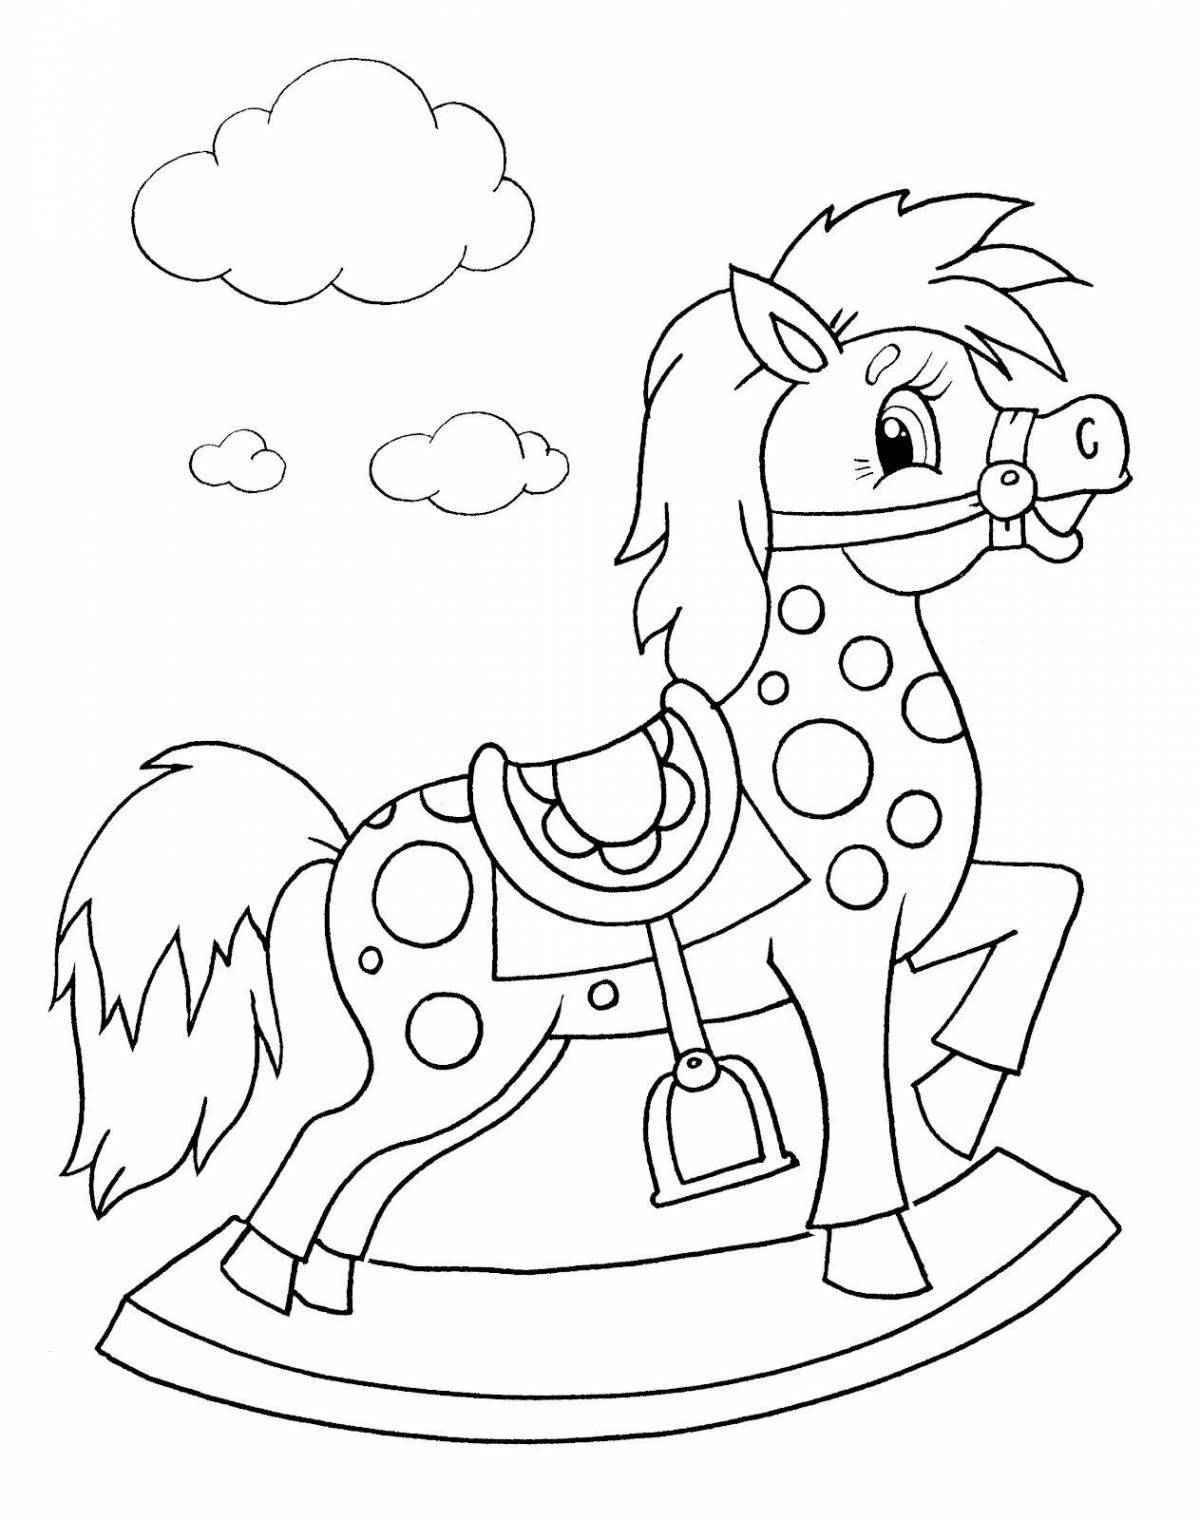 Coloring pdf for the little ones